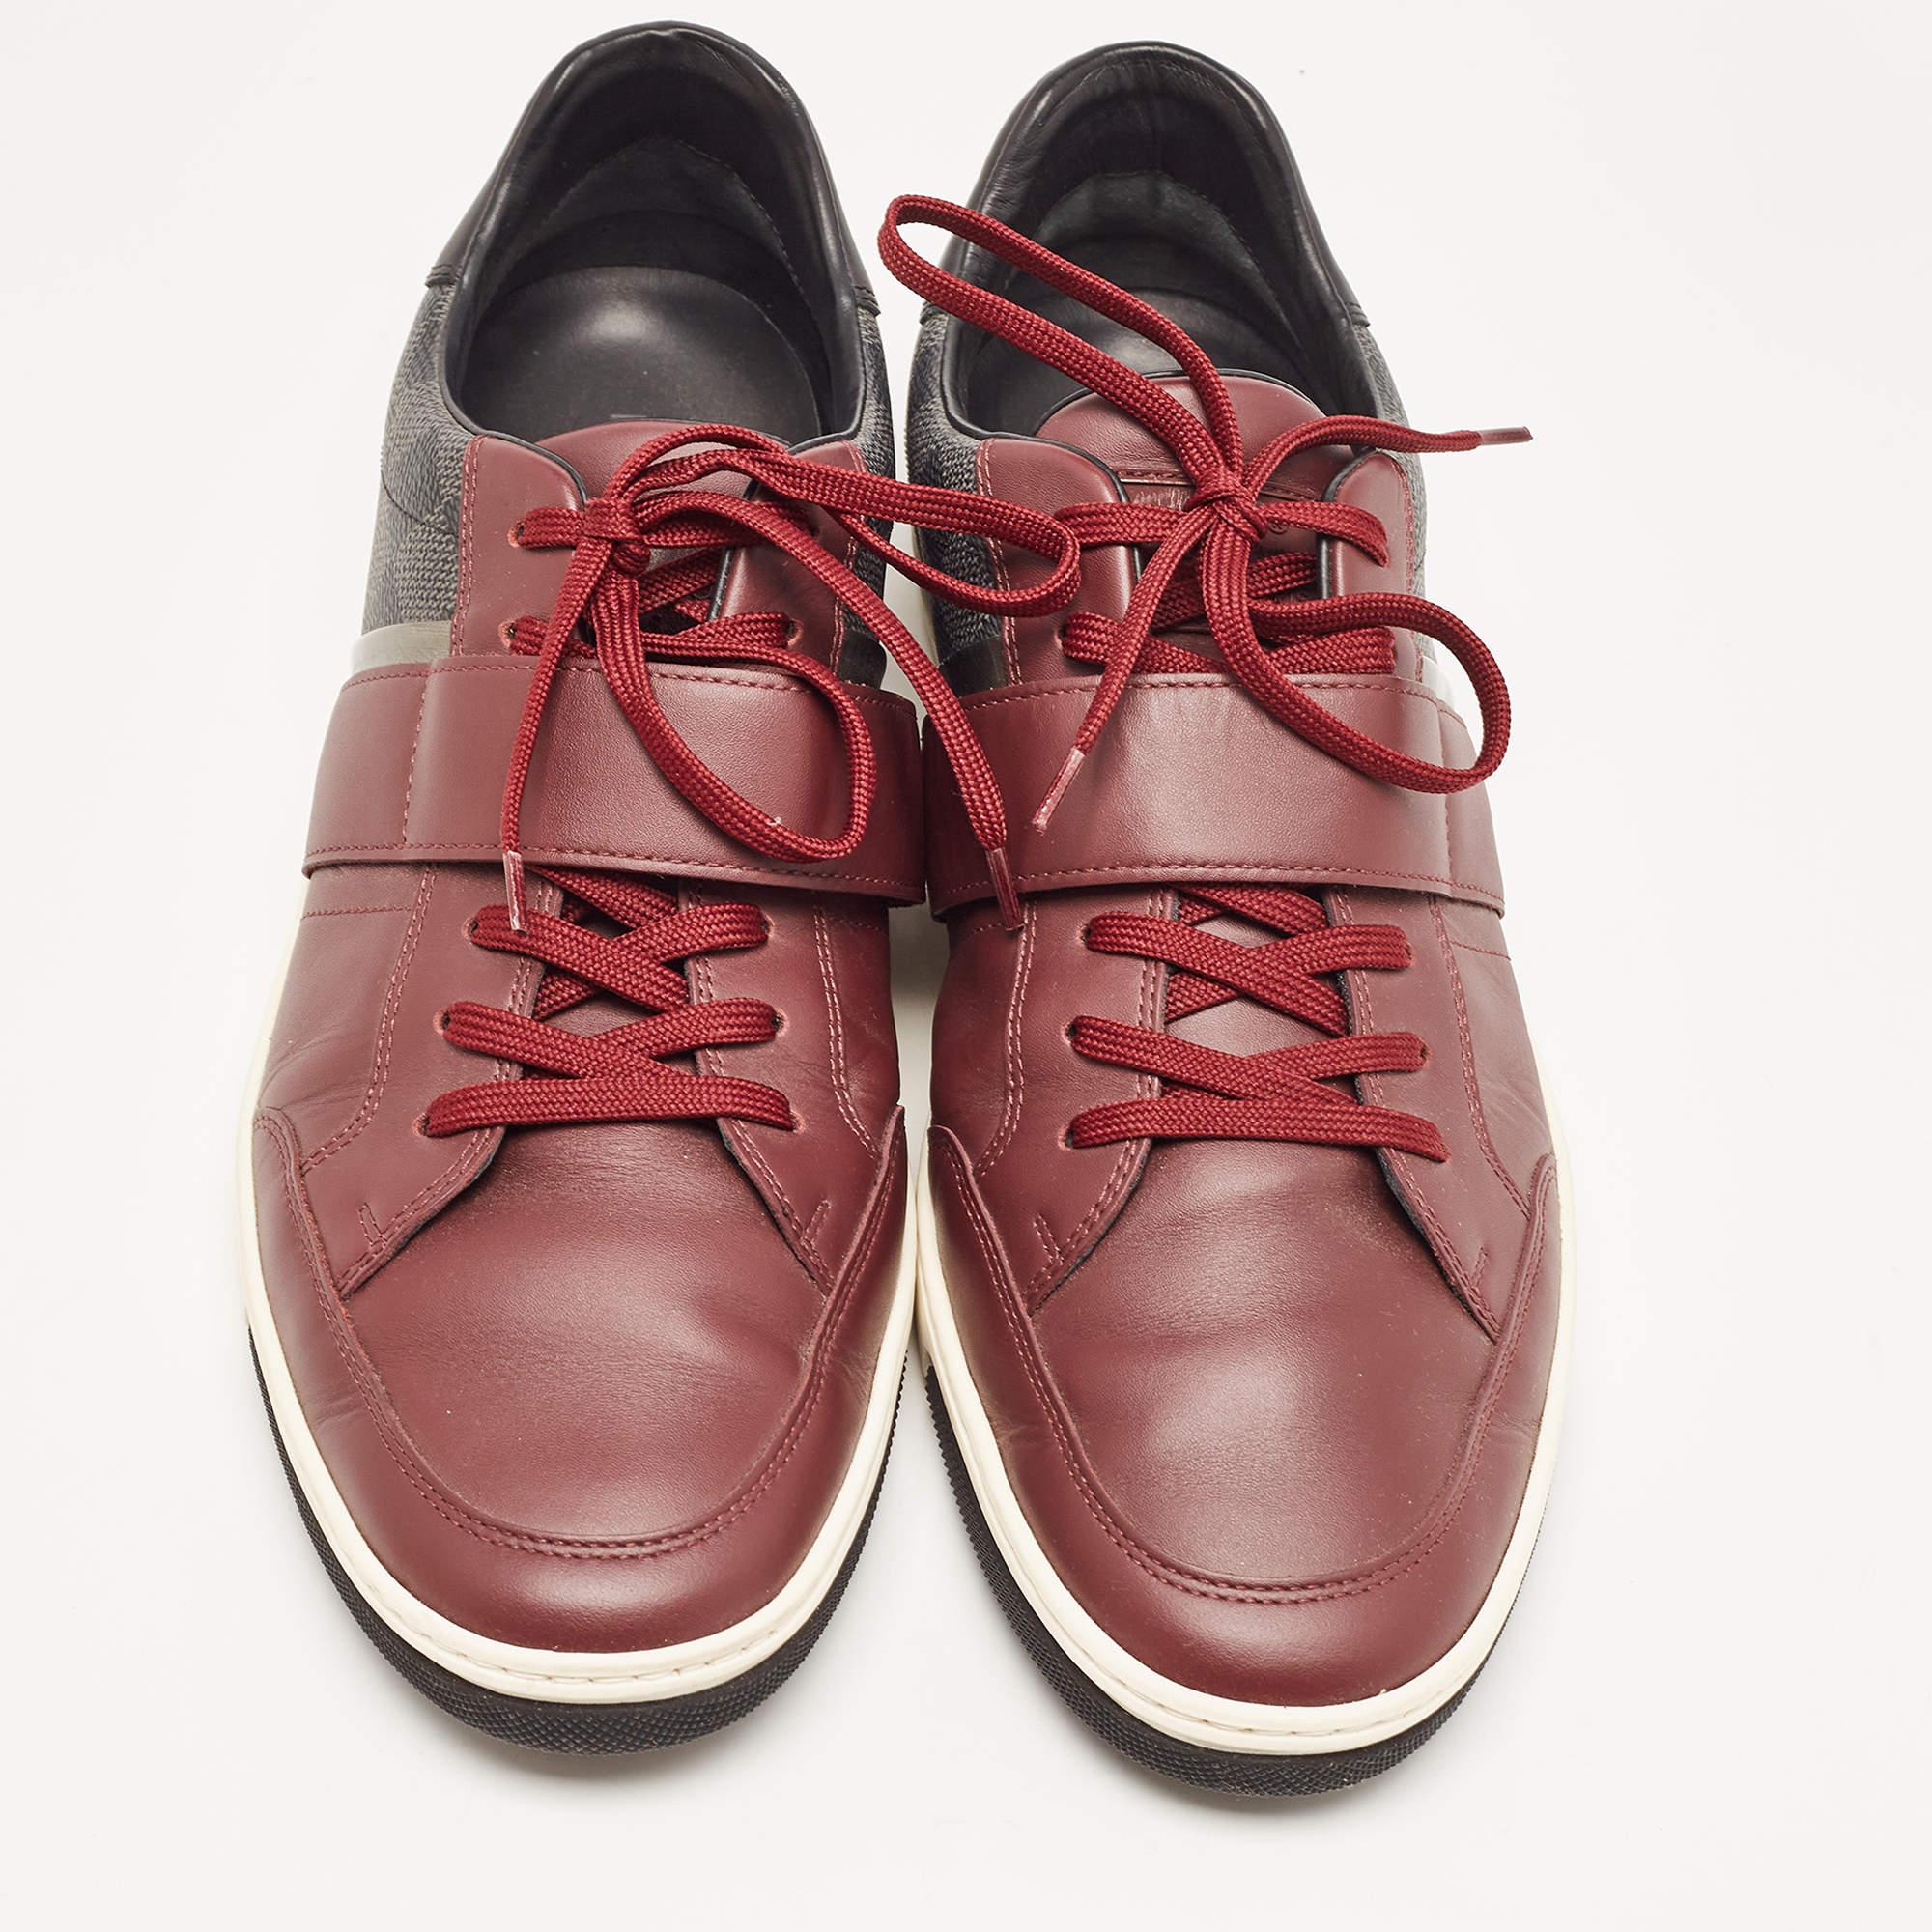 Coming in a classic silhouette, these LV sneakers are a seamless combination of luxury, comfort, and style. These sneakers are finished with signature details and comfortable insoles.

